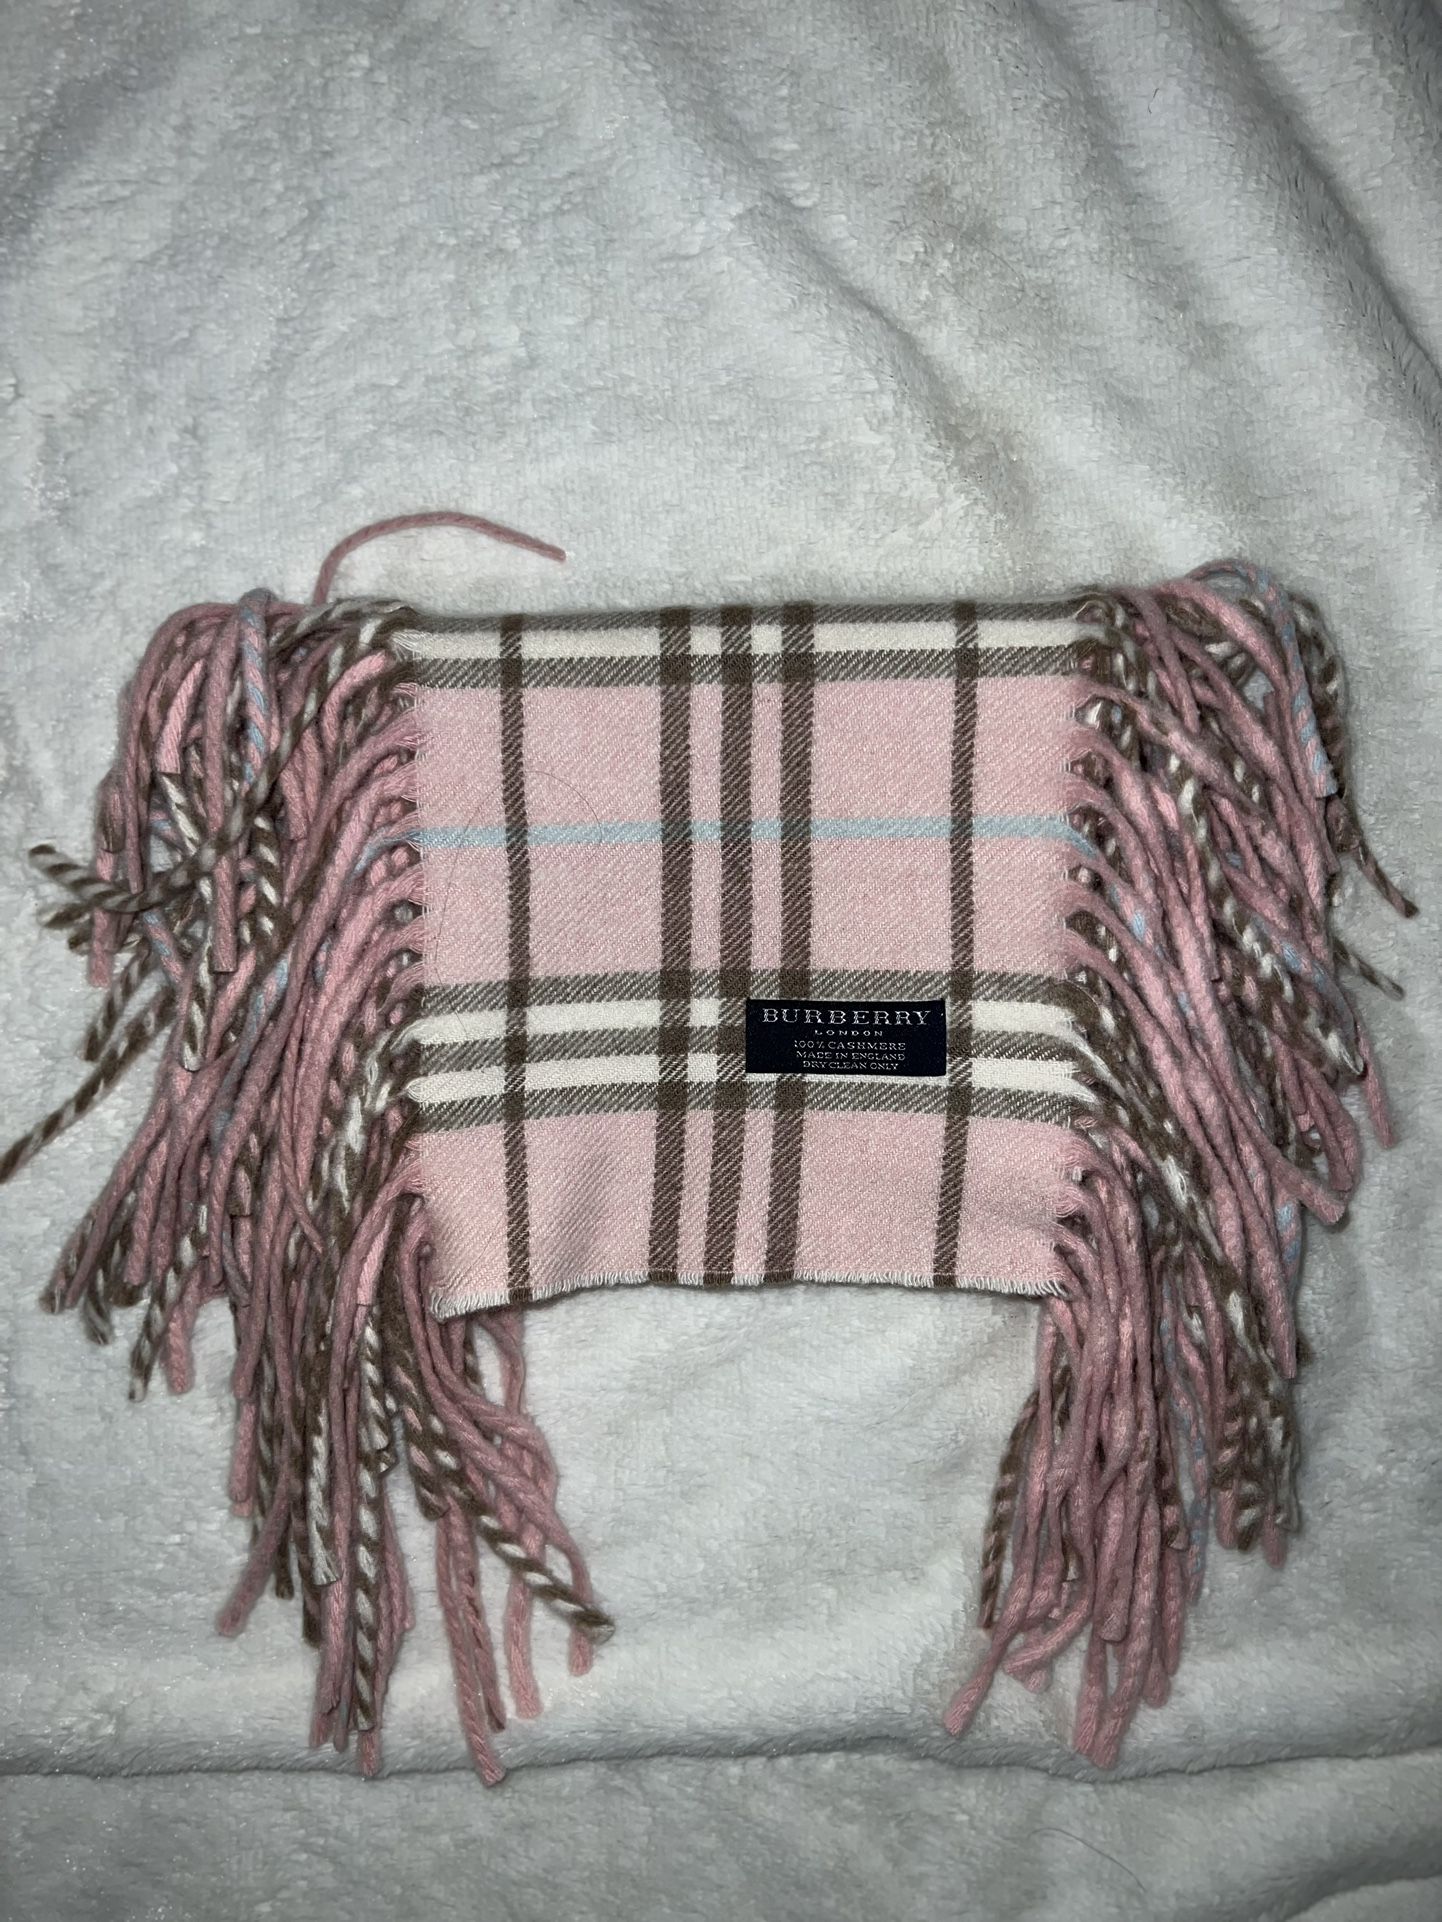 Burberry Pink Plaid Cashmere Double Fringe Scarf Check